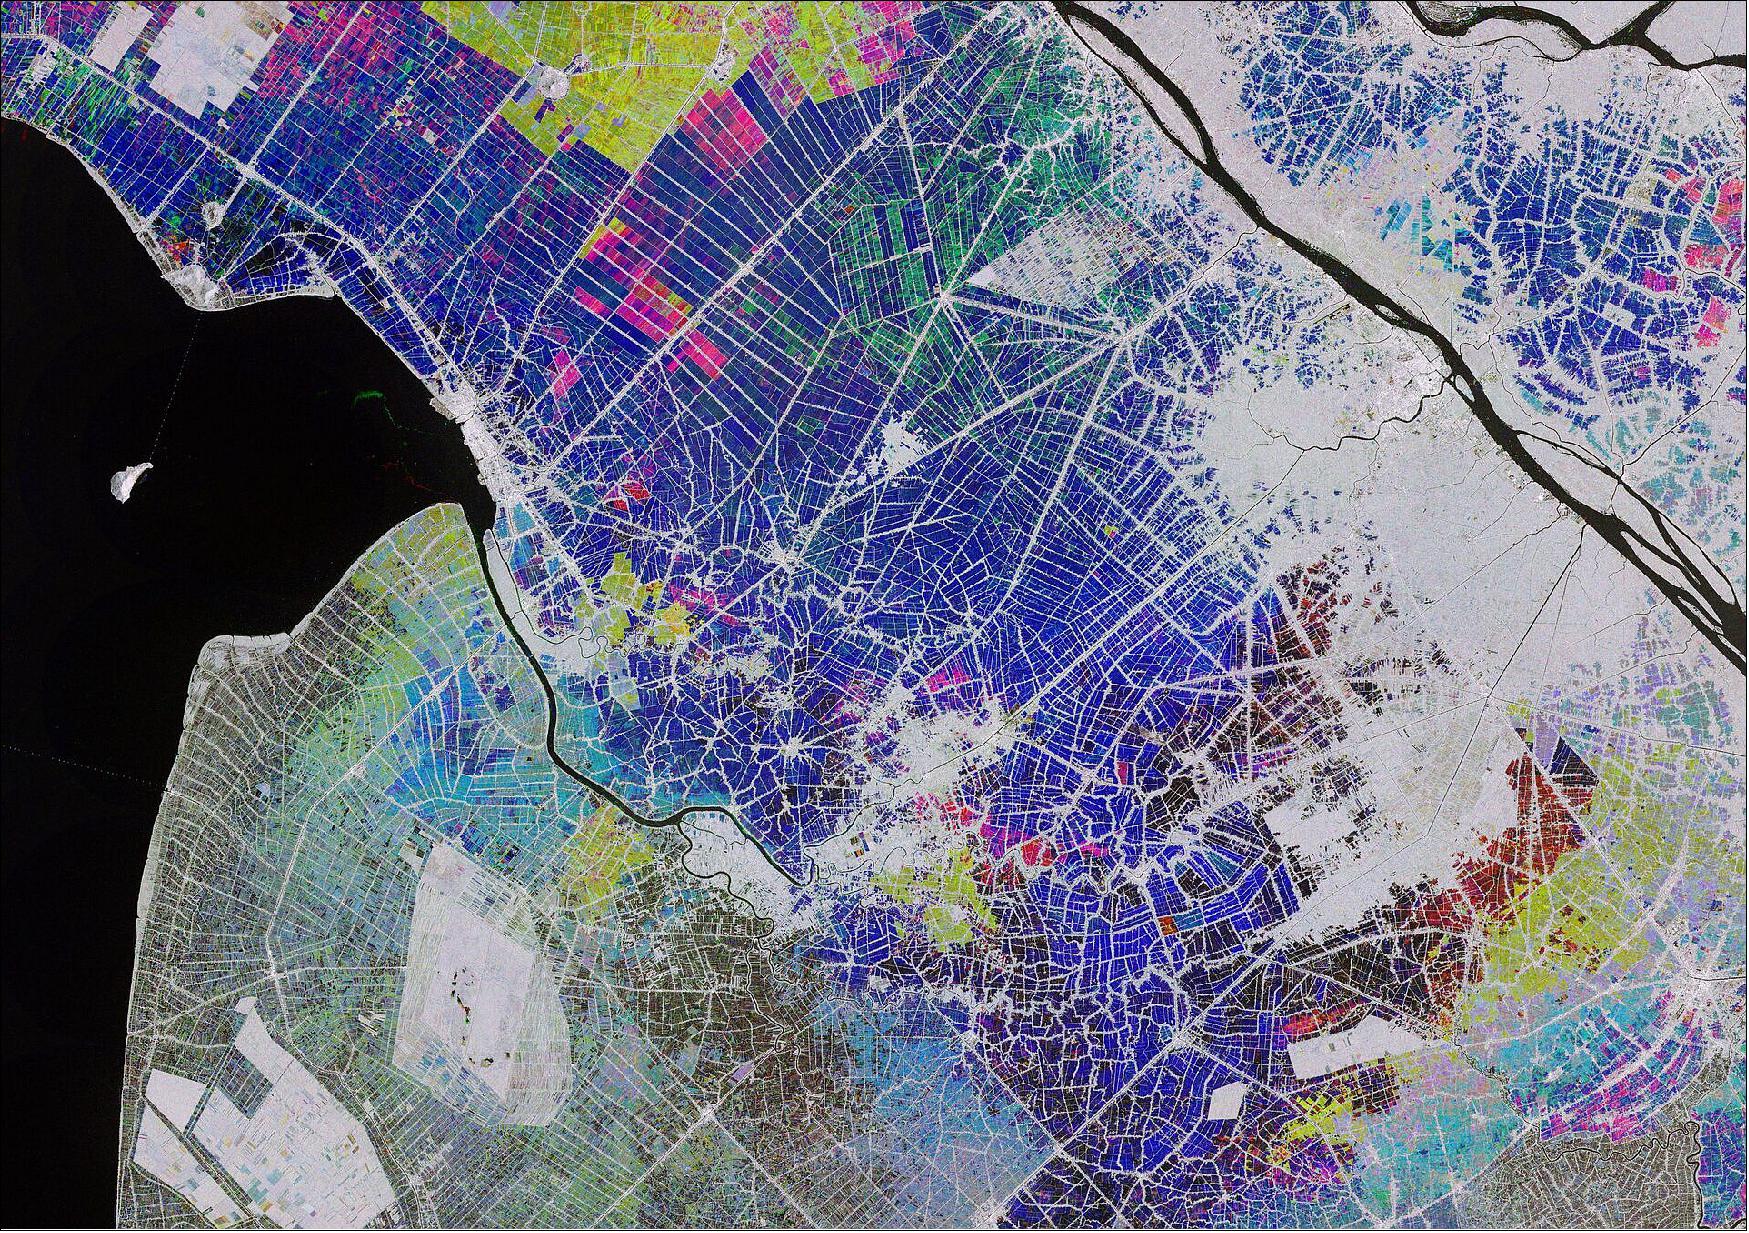 Figure 25: This multi-temporal image combines three radar acquisitions from the Copernicus Sentinel-1 mission taken around one month apart to show changes in crop and land conditions over time. The bright colors in the image come from changes on the ground that have occurred between acquisitions. The first image, from 28 October 2019, picks out changes in pink and red, the second from 21 November shows changes in green, and the third image, from 27 December, shows changes in blue. As seen in the image, the majority of growth in the rice fields is visible in December. The grey areas represent either built-up areas or patches of land that saw no changes during this time. This image is also featured on the Earth from Space video program (image credit: ESA, the image contains modified Copernicus Sentinel data (2019), processed by ESA, CC BY-SA 3.0 IGO)